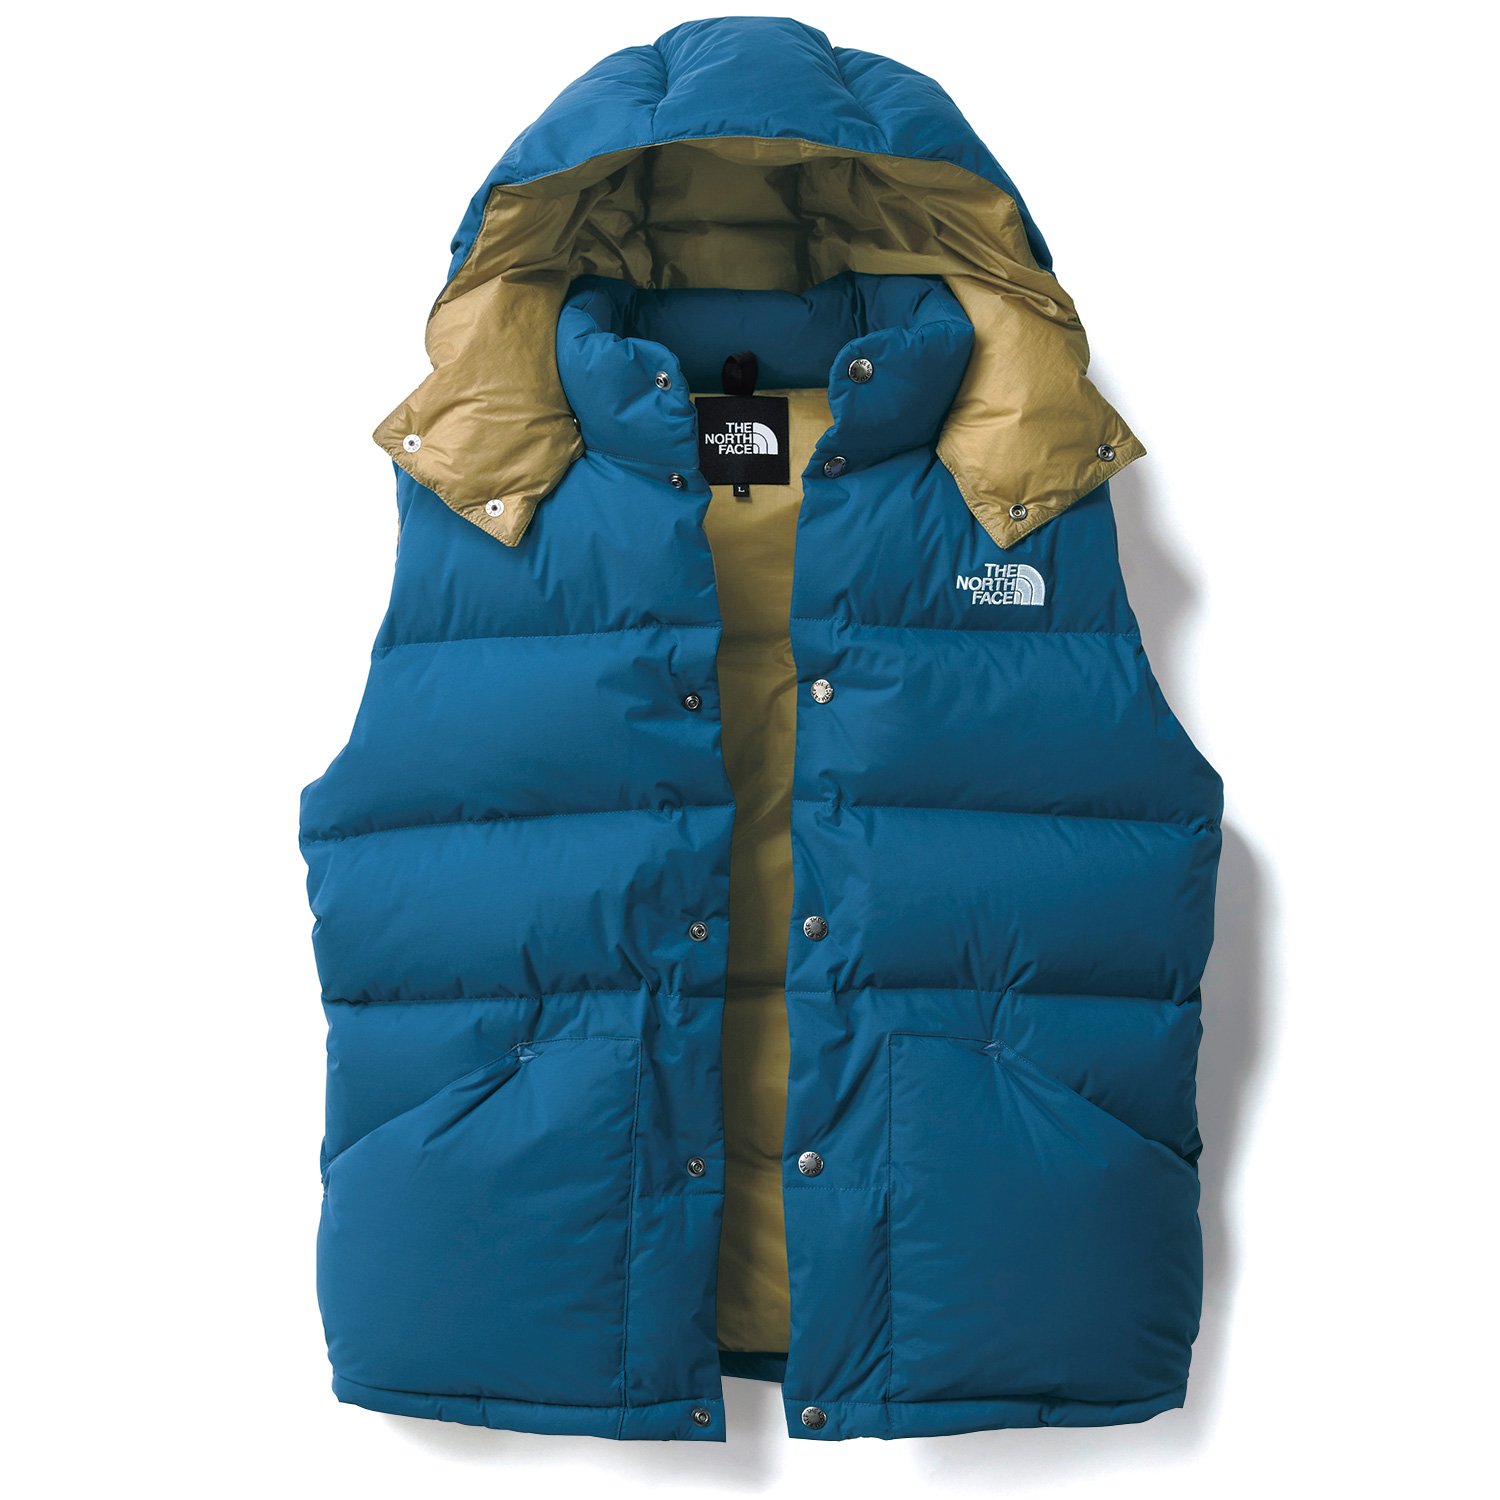 The North Face ダウンベスト プレミアカモ